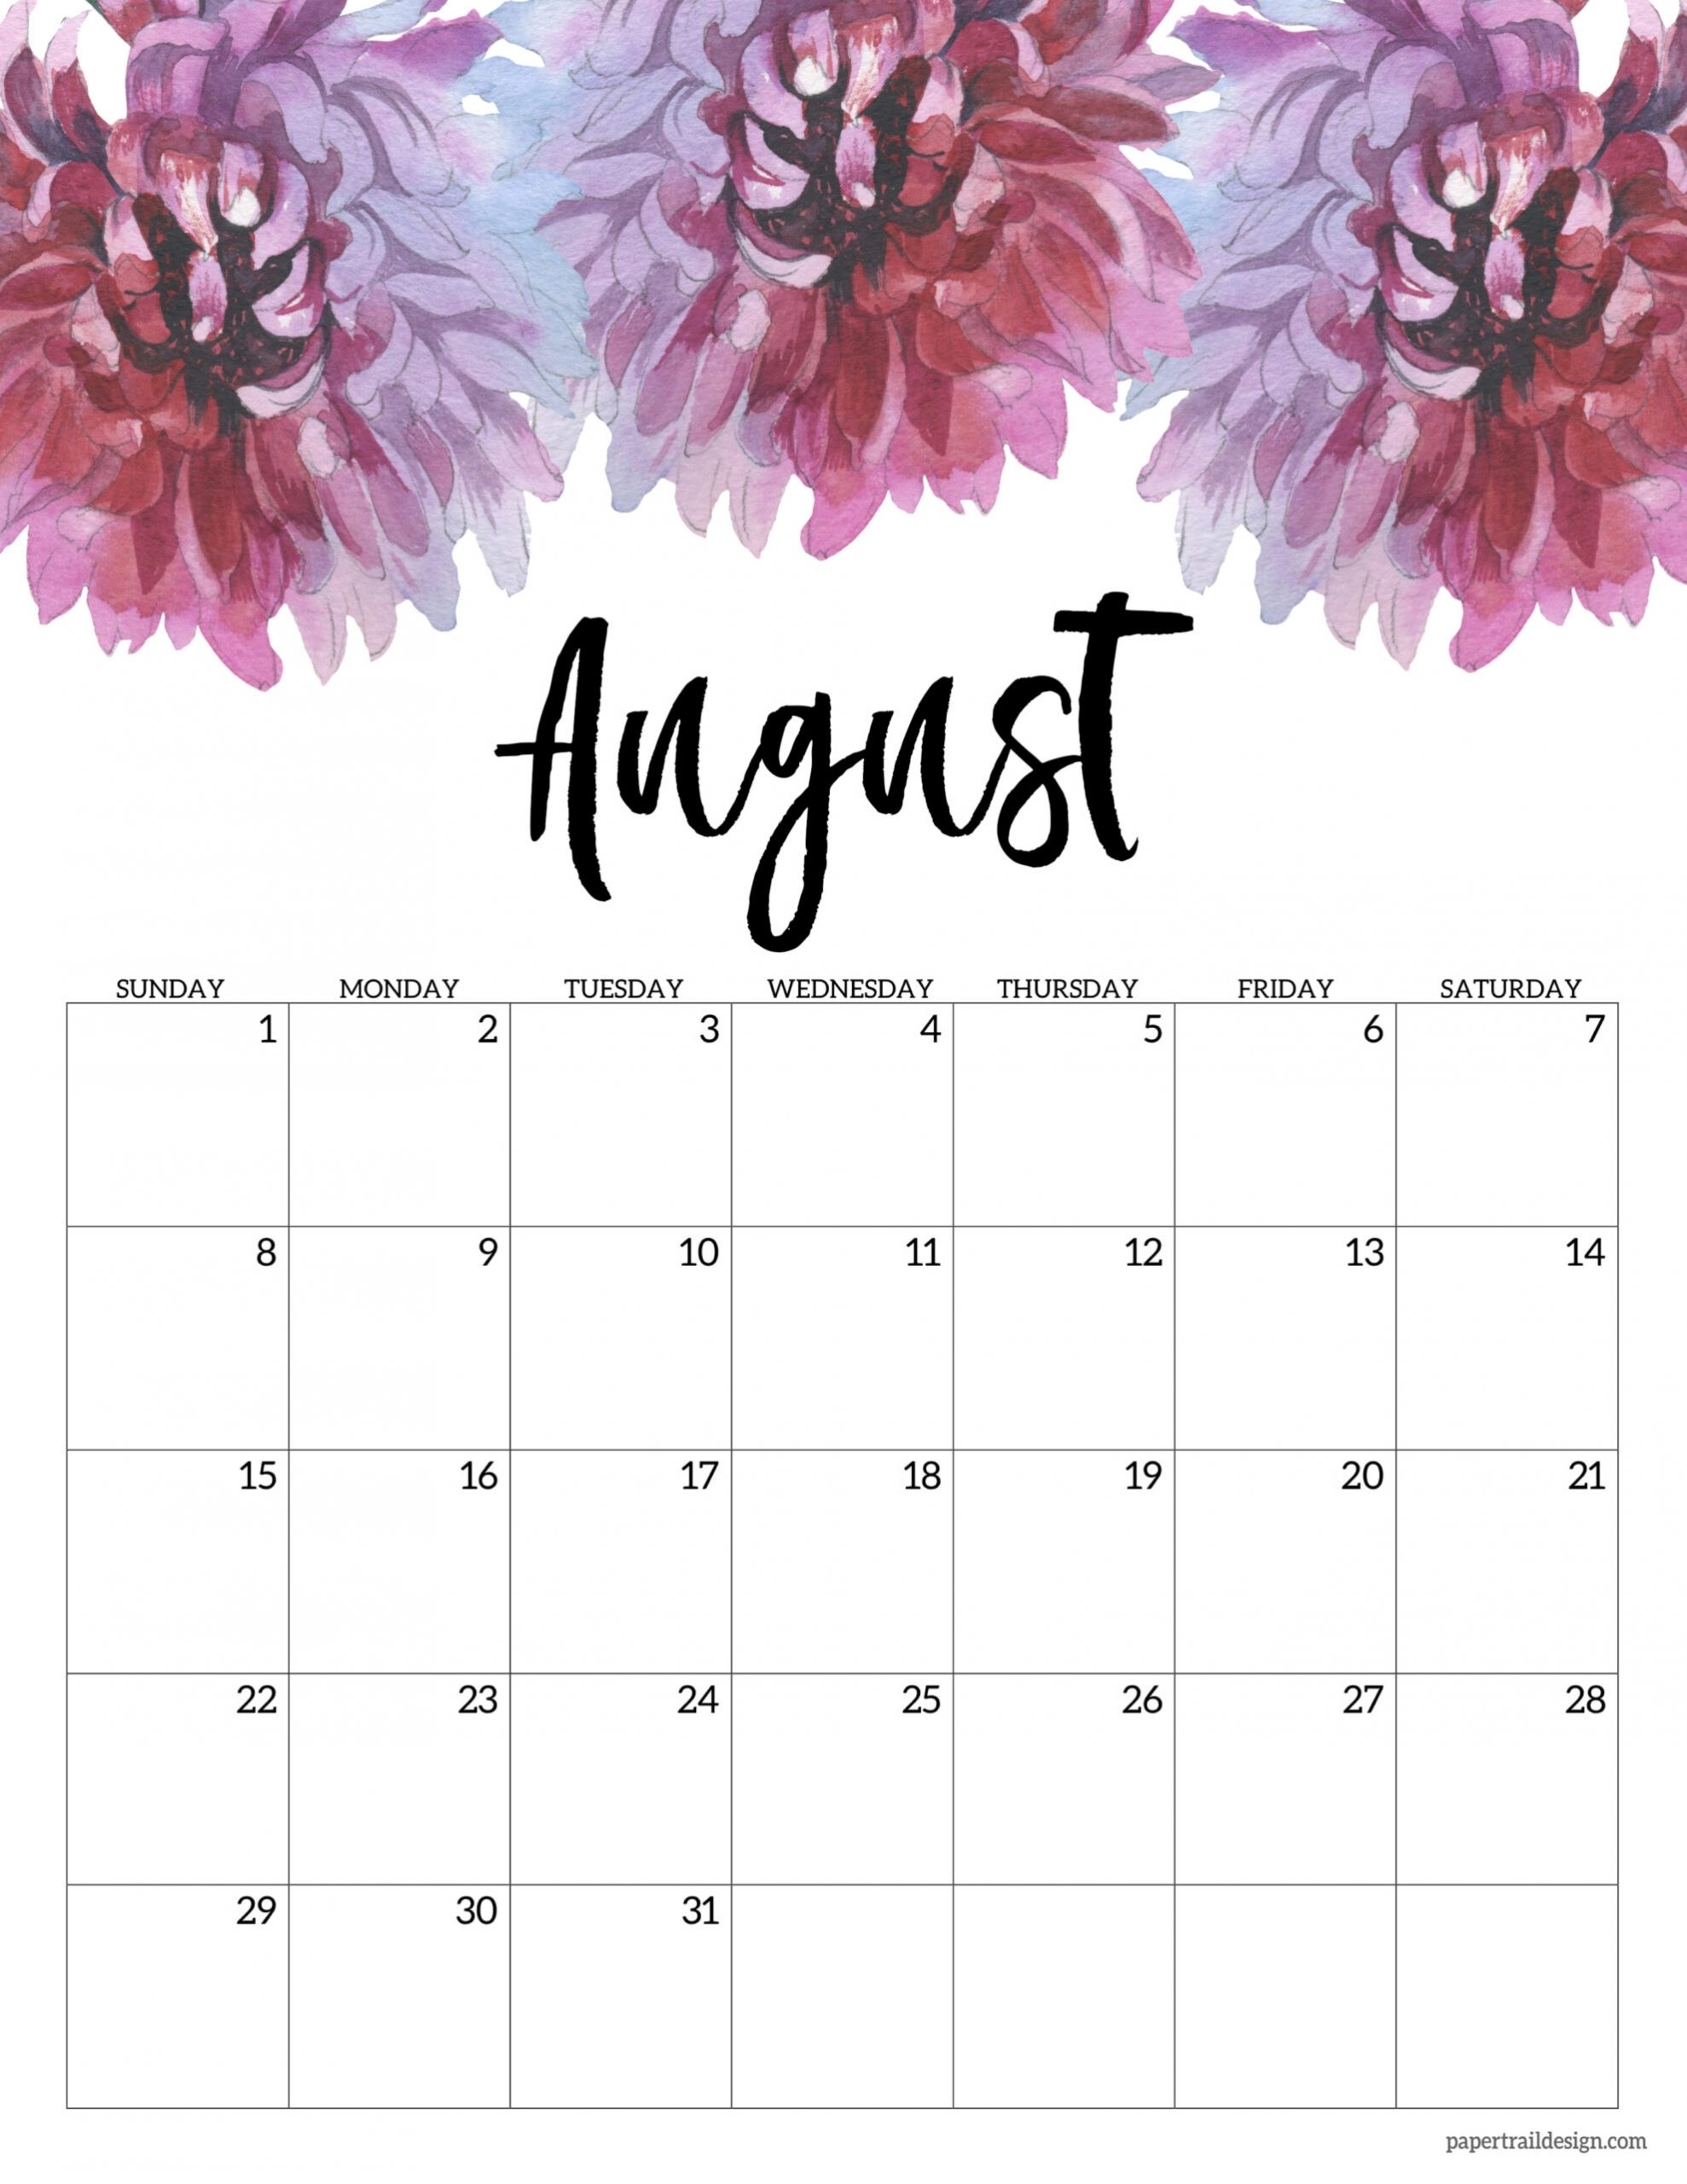 Catch August 2021 Printable Calendar With Flowers